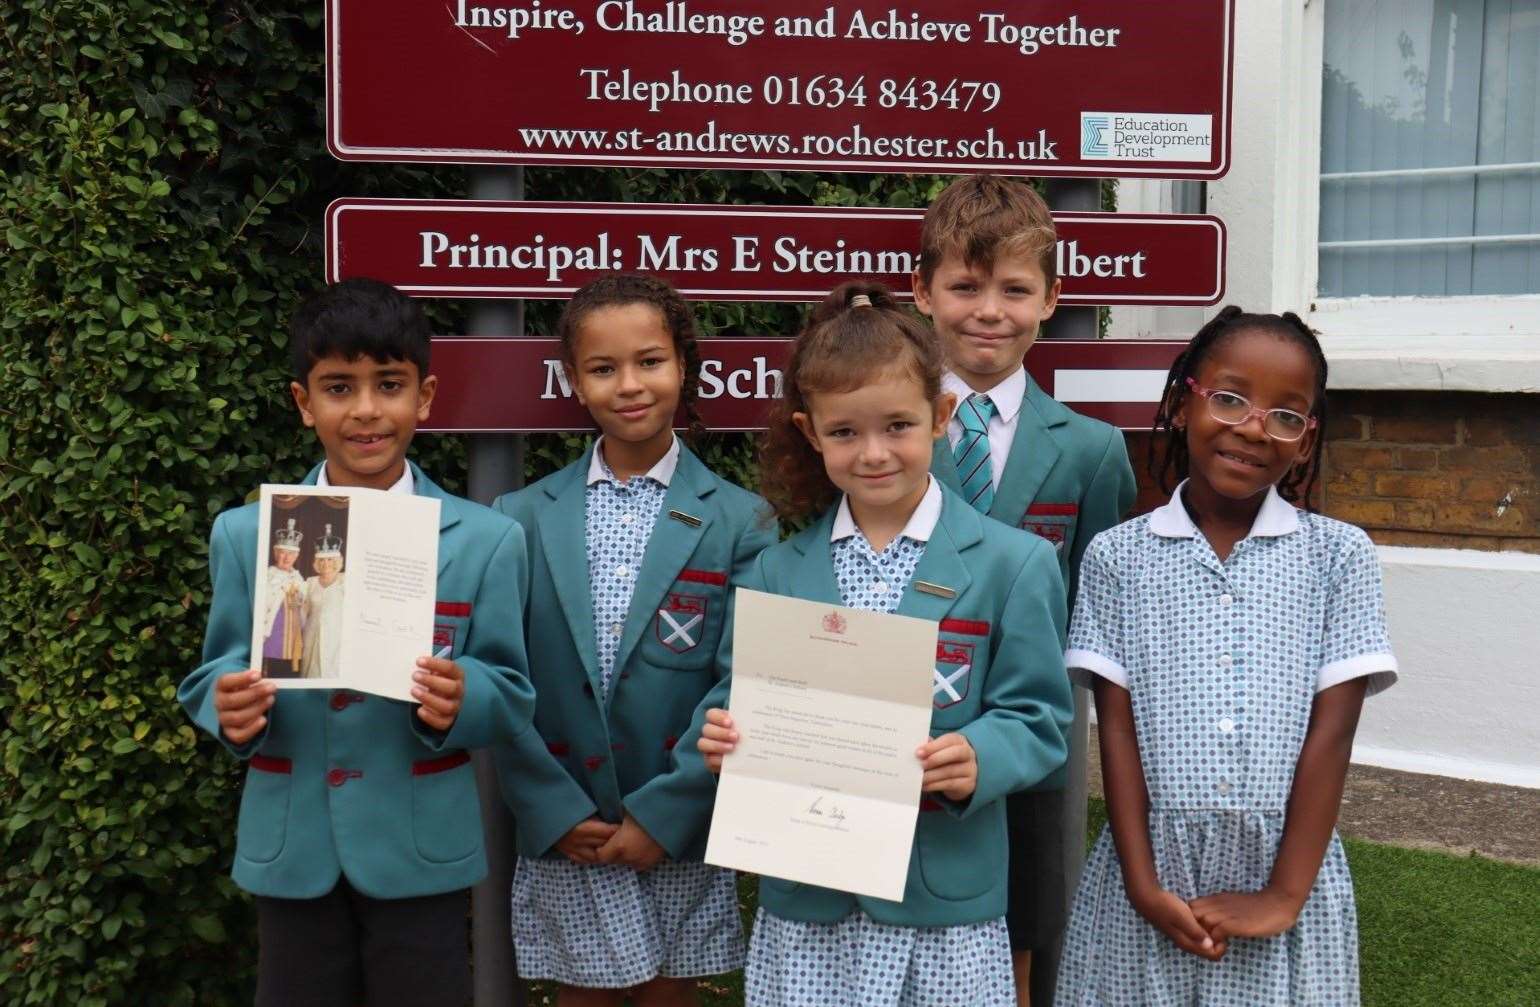 Last year's Year 2 pupils sent letters to the King